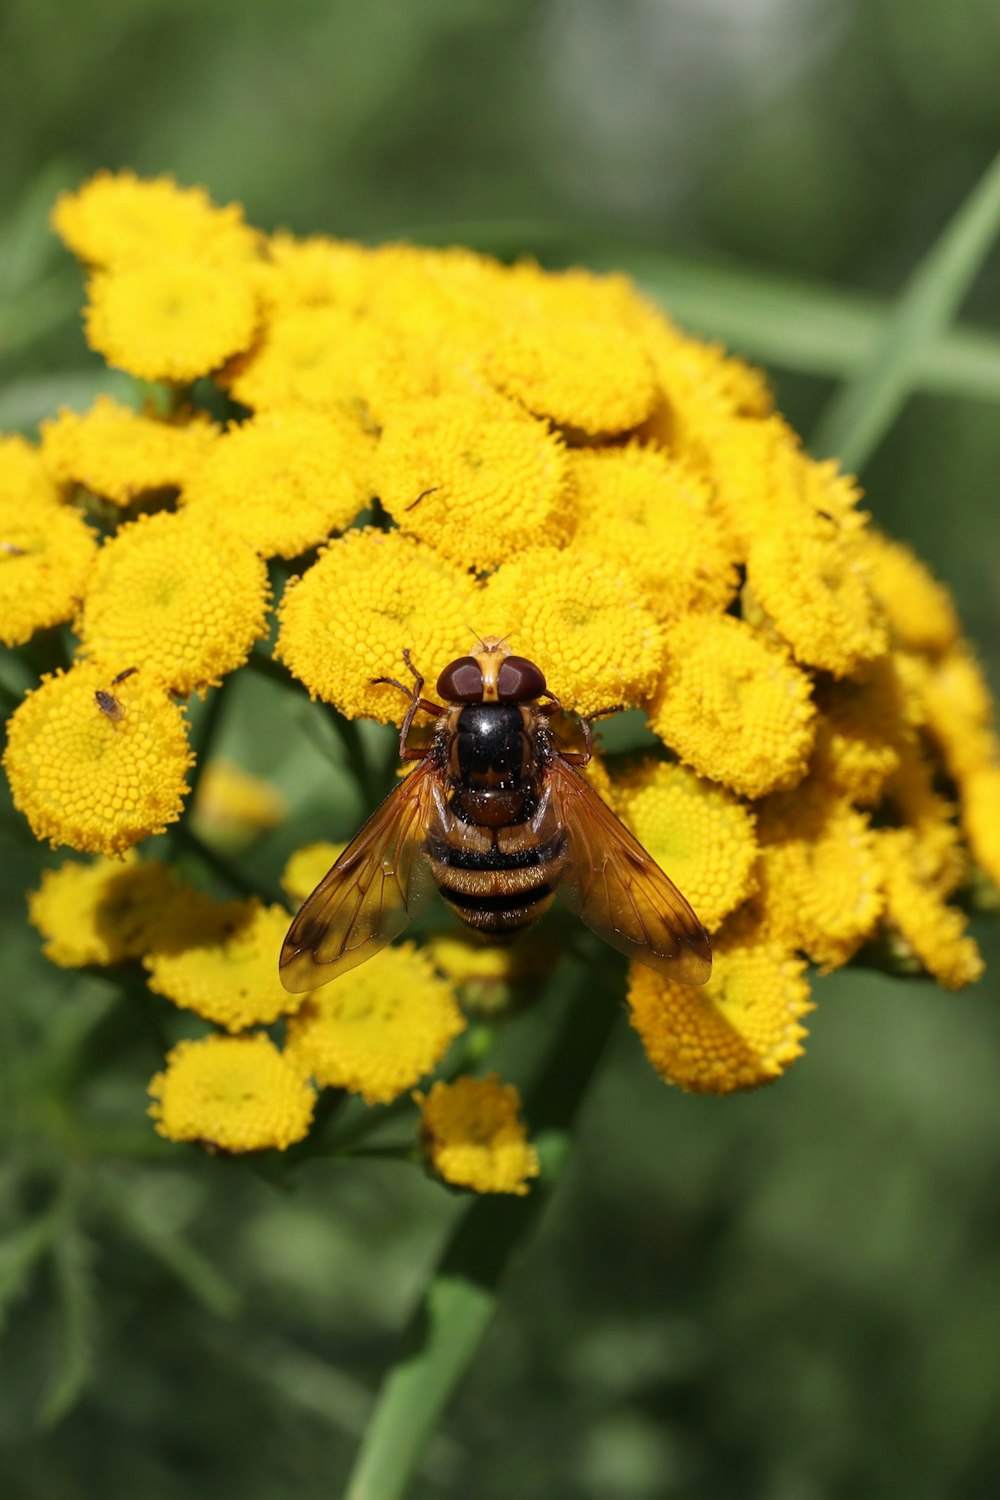 a close up of a bee on a yellow flower